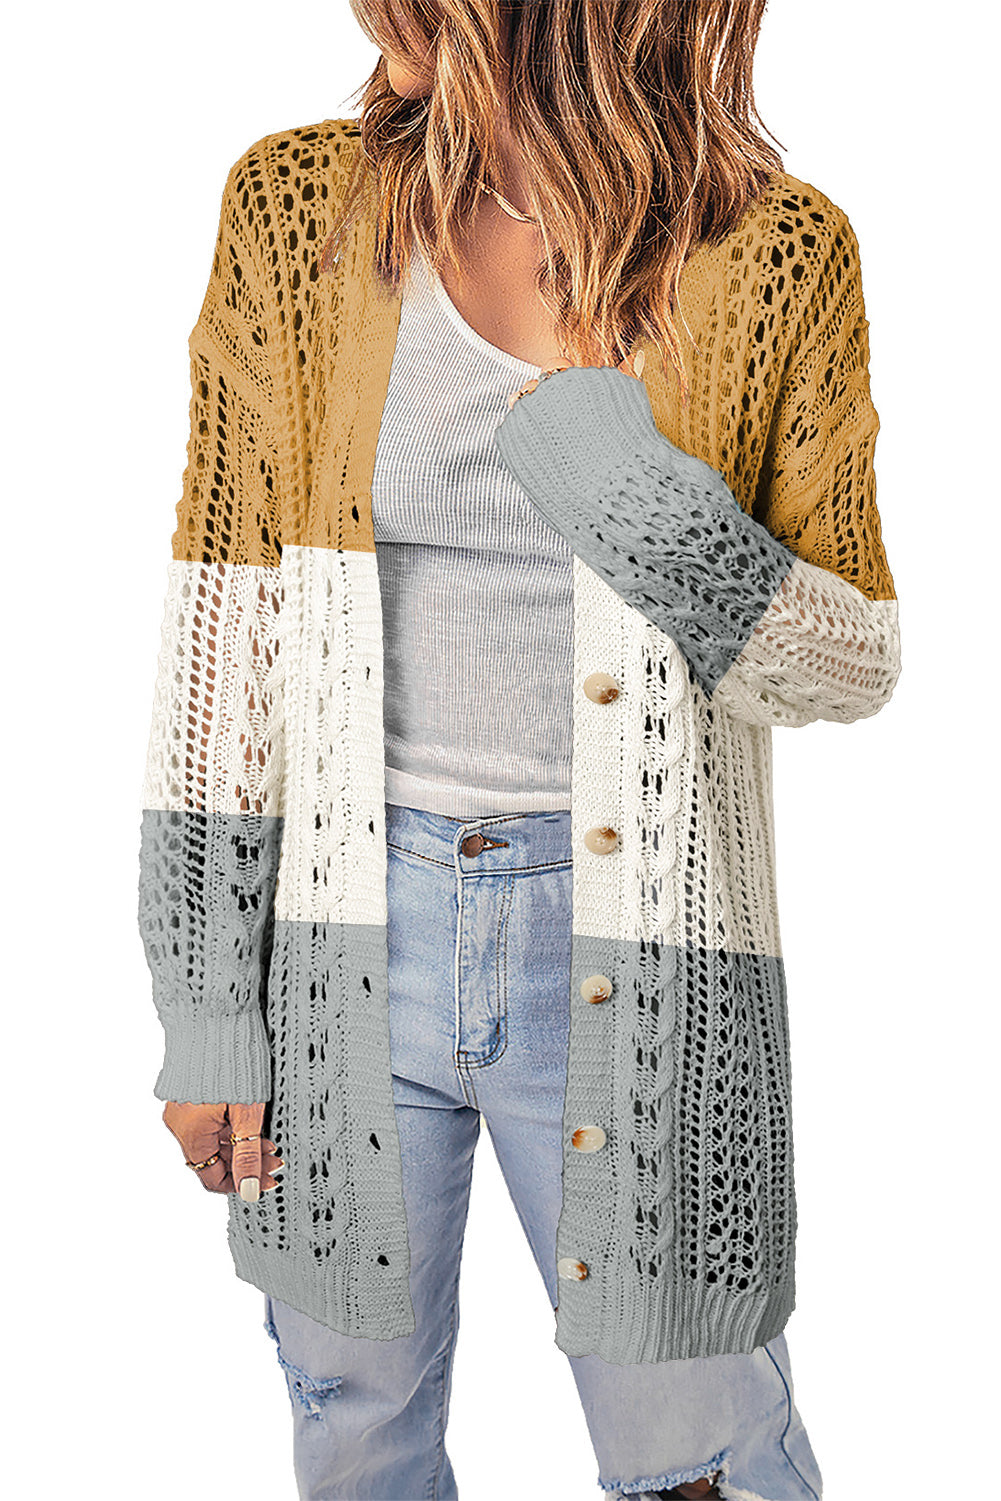 Openwork Ribbed Cuff Longline Cardigan - Yellow / S - Women’s Clothing & Accessories - Shirts & Tops - 12 - 2024